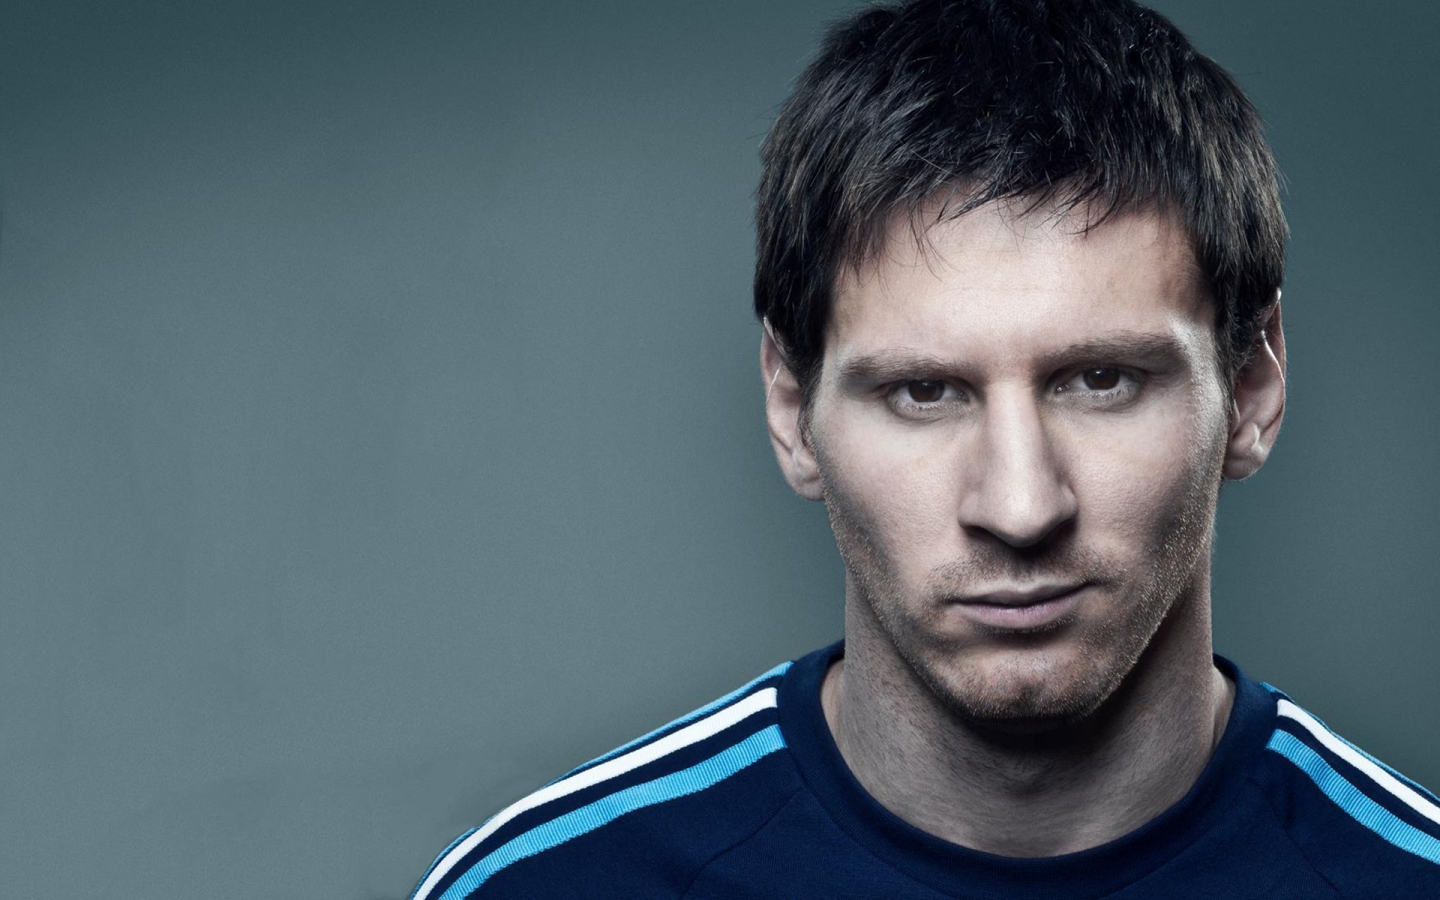 Messi Pose for 1440 x 900 widescreen resolution